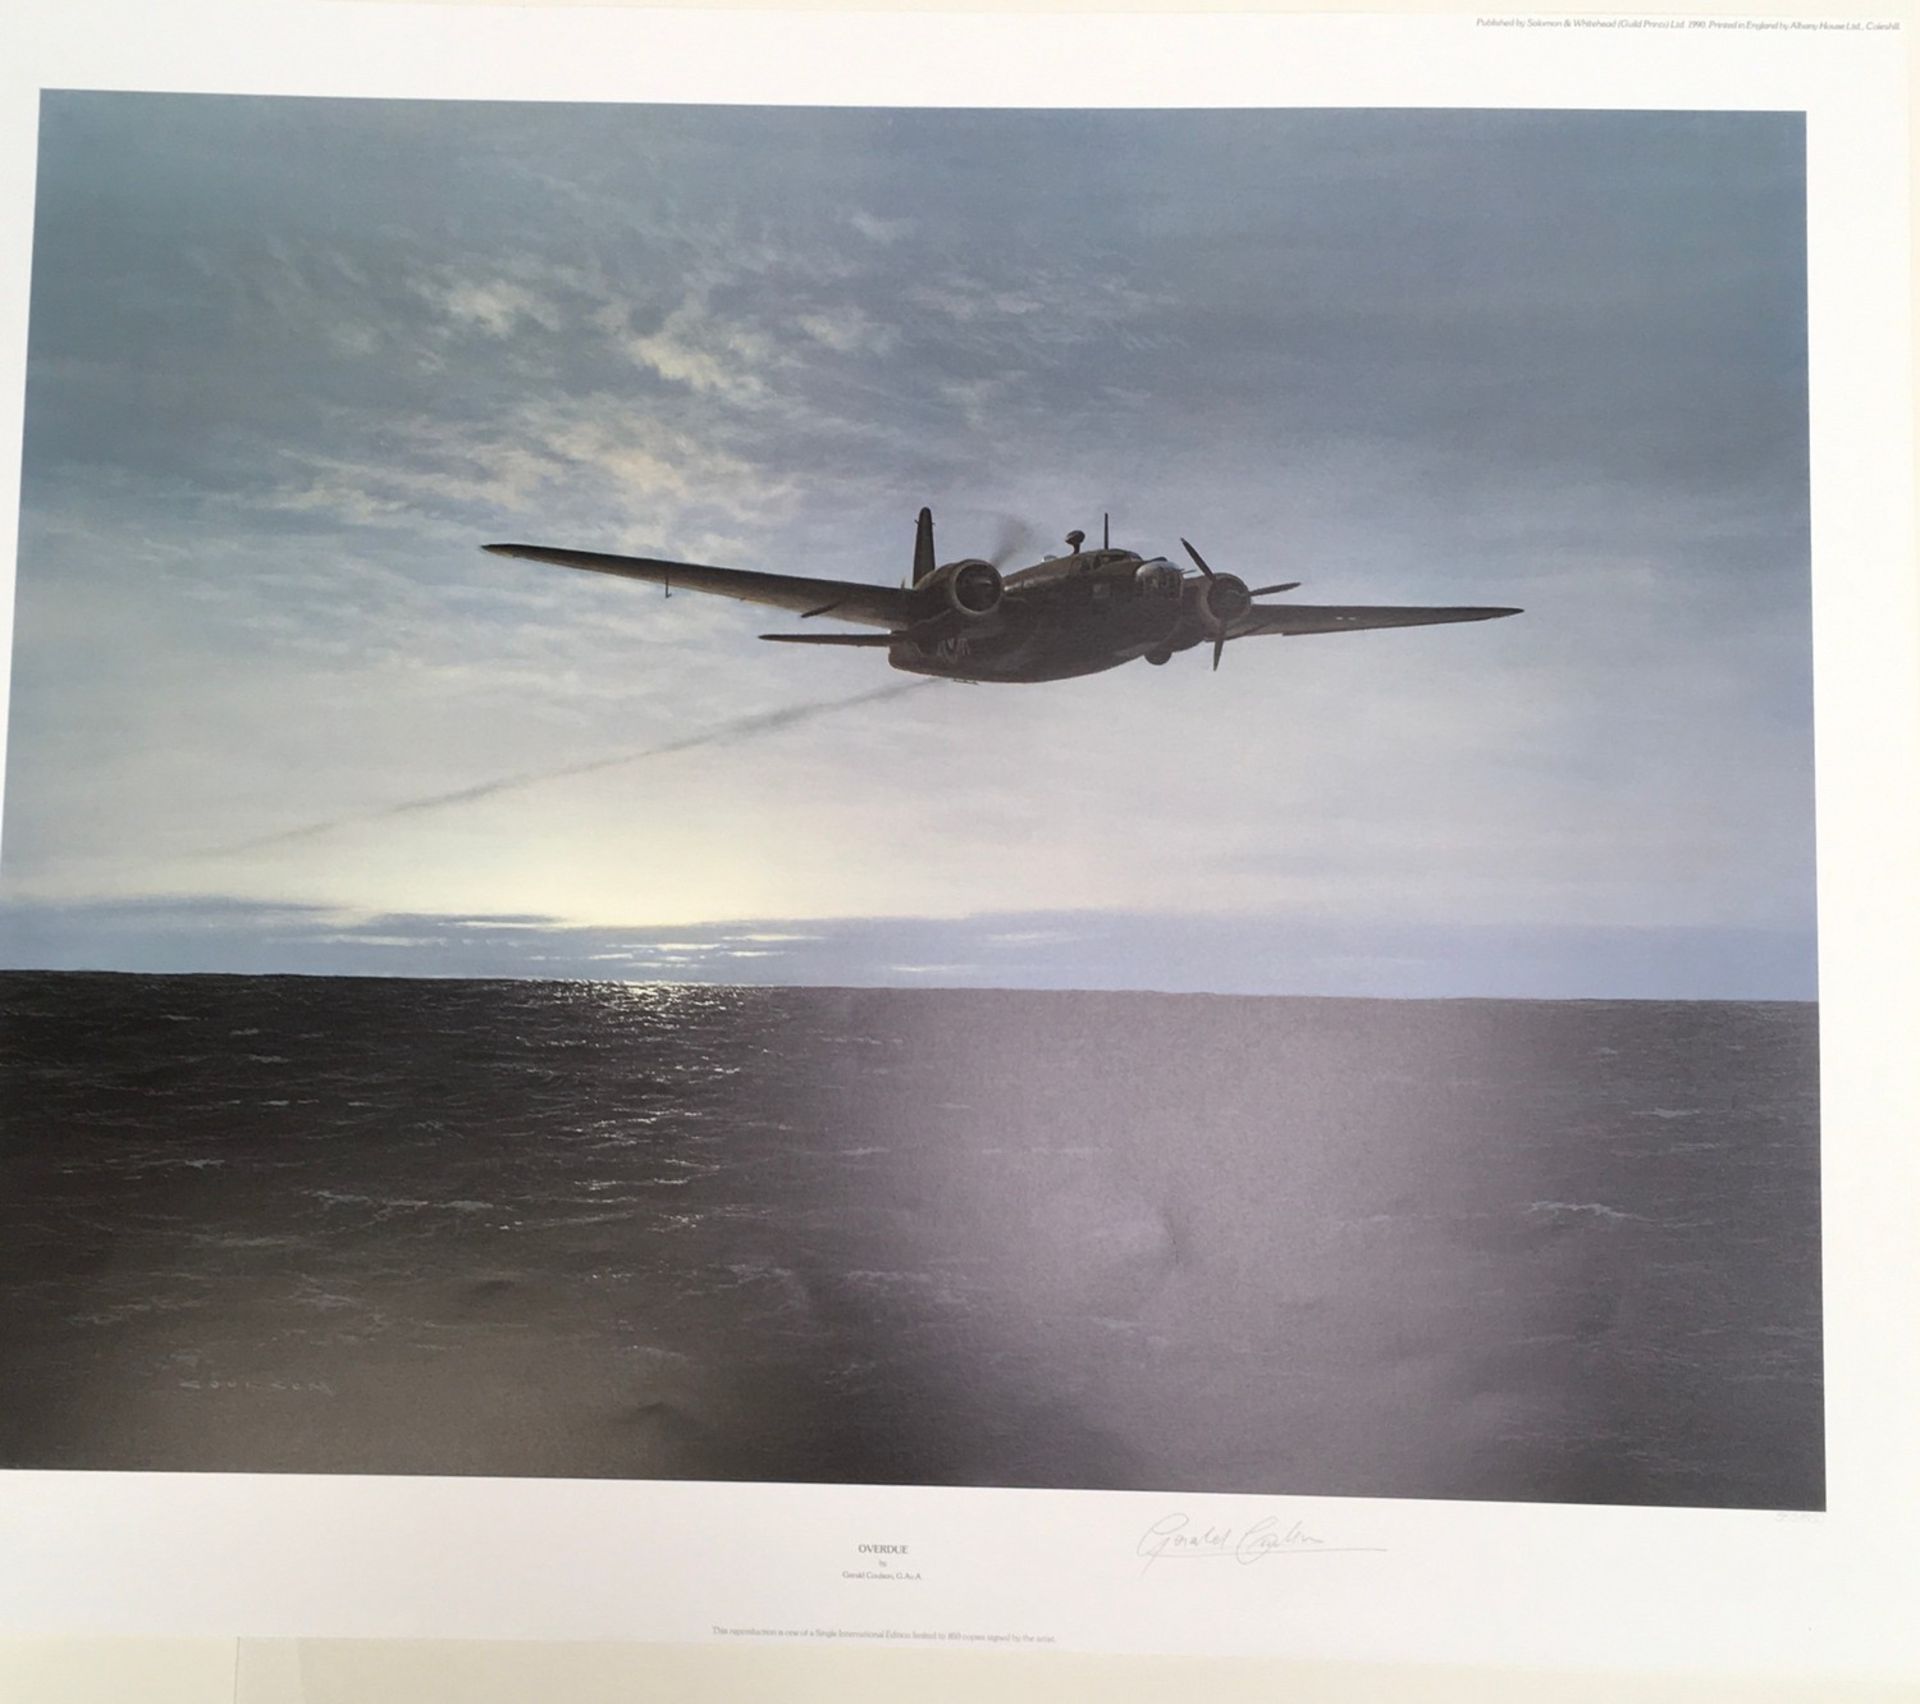 Overdue a ltd edition second WW study of RAF airplane by Gerald Coulson with indentation stamp